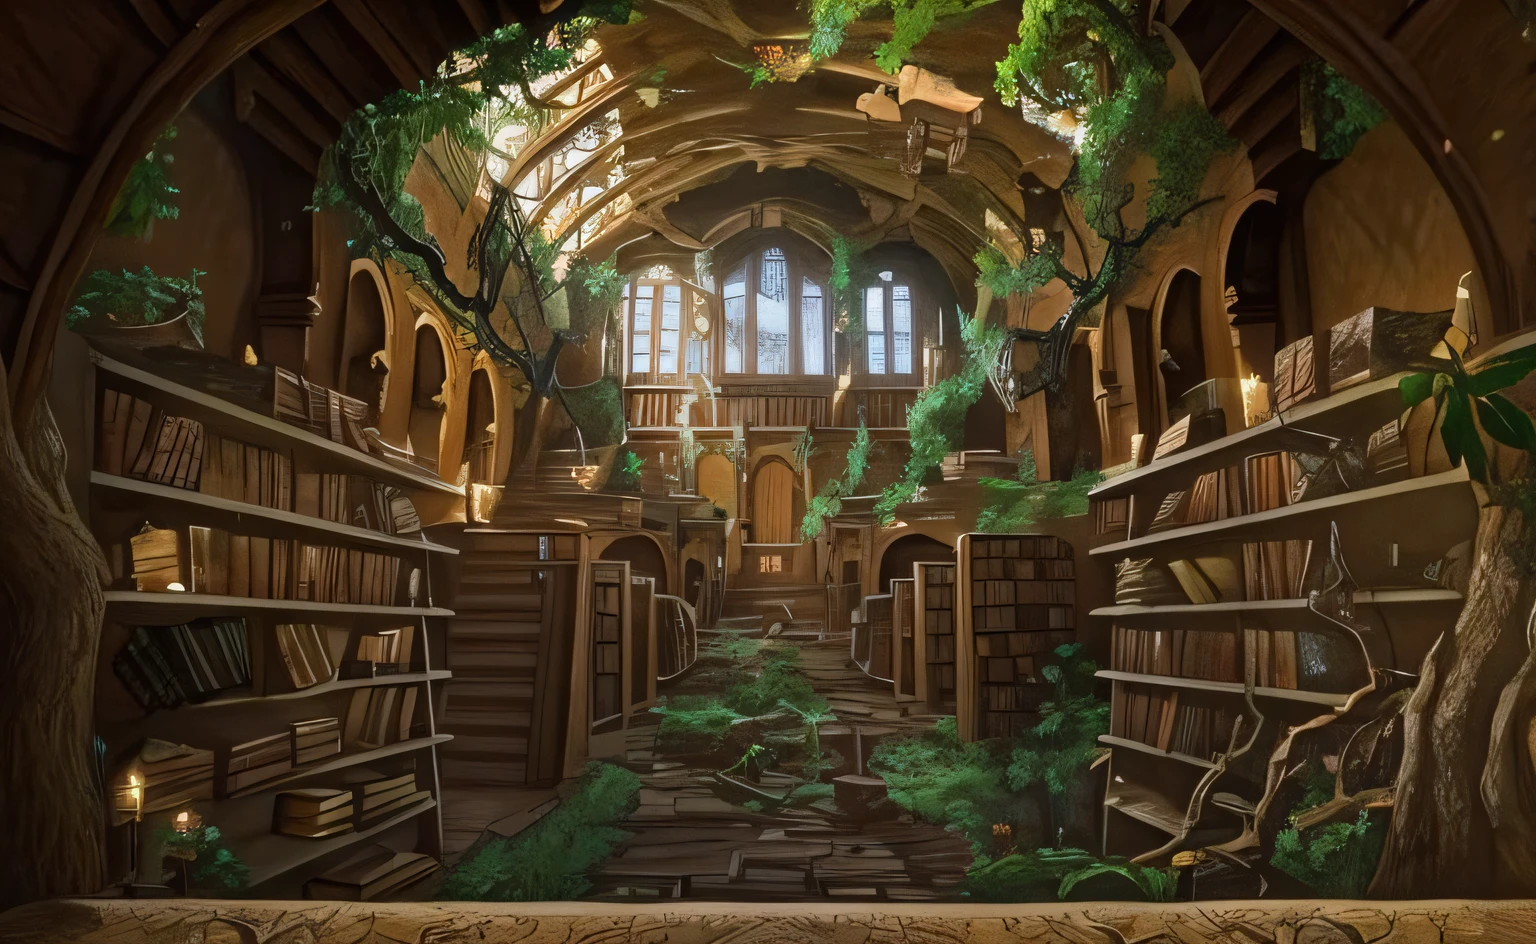 Arafed view of a library with a tree and a path, old library, gothic epic library concept, gothic epic library, an overloaded library, library of ruina concept art, gothic library, in a devastated library, old library, magical atmosphere, alchemist library background, MAGIC LIBRARY, fantasy overgrown world, library background, castle library, A full-size upscaling eternal library clearer than the original